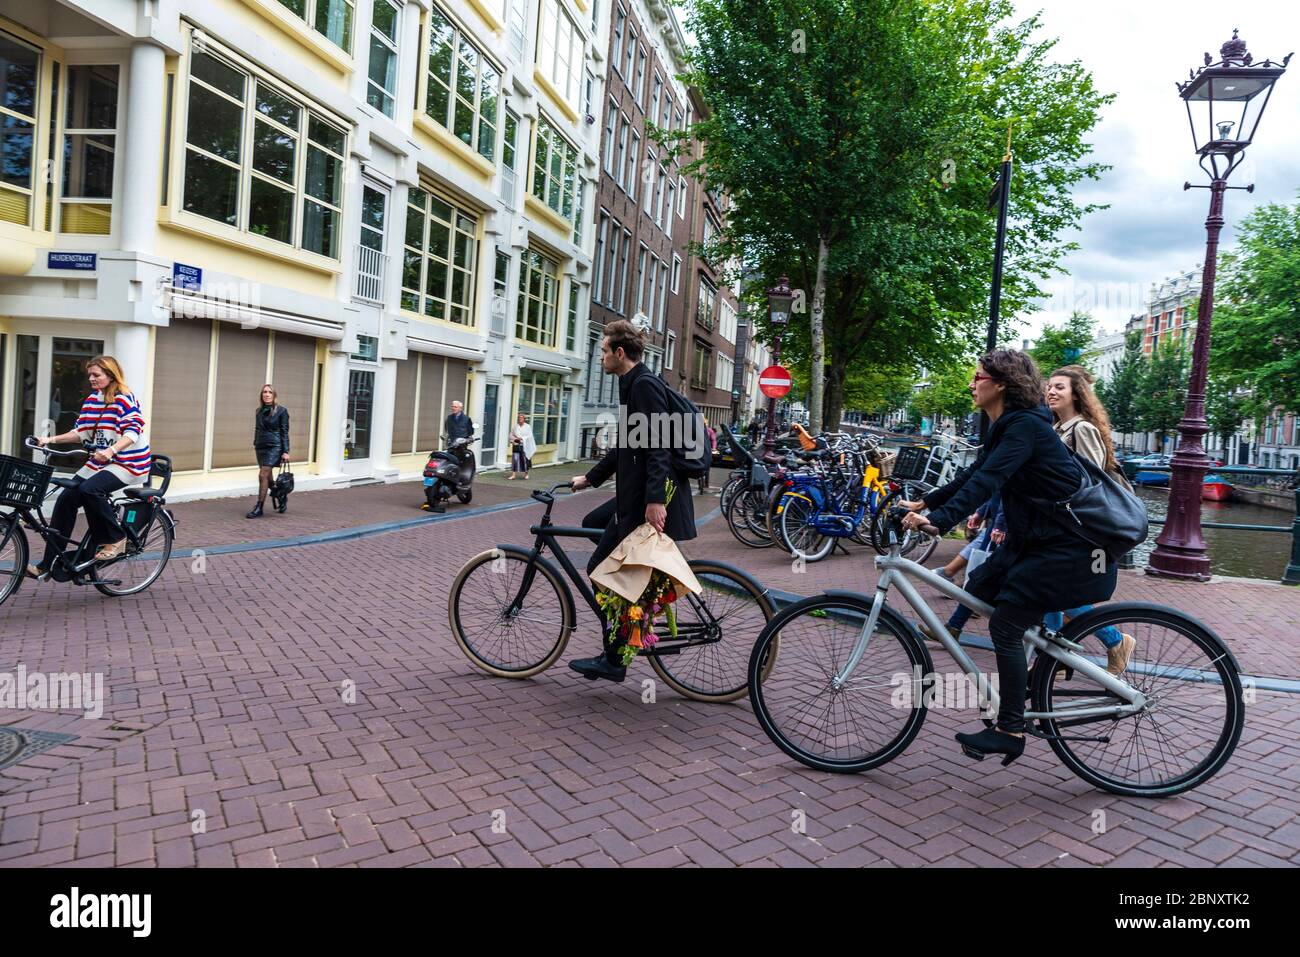 Amsterdam, Netherlands - September 8, 2018: Street with a a young man carrying a bouquet of flowers and more people on bicycle in the old town of Amst Stock Photo